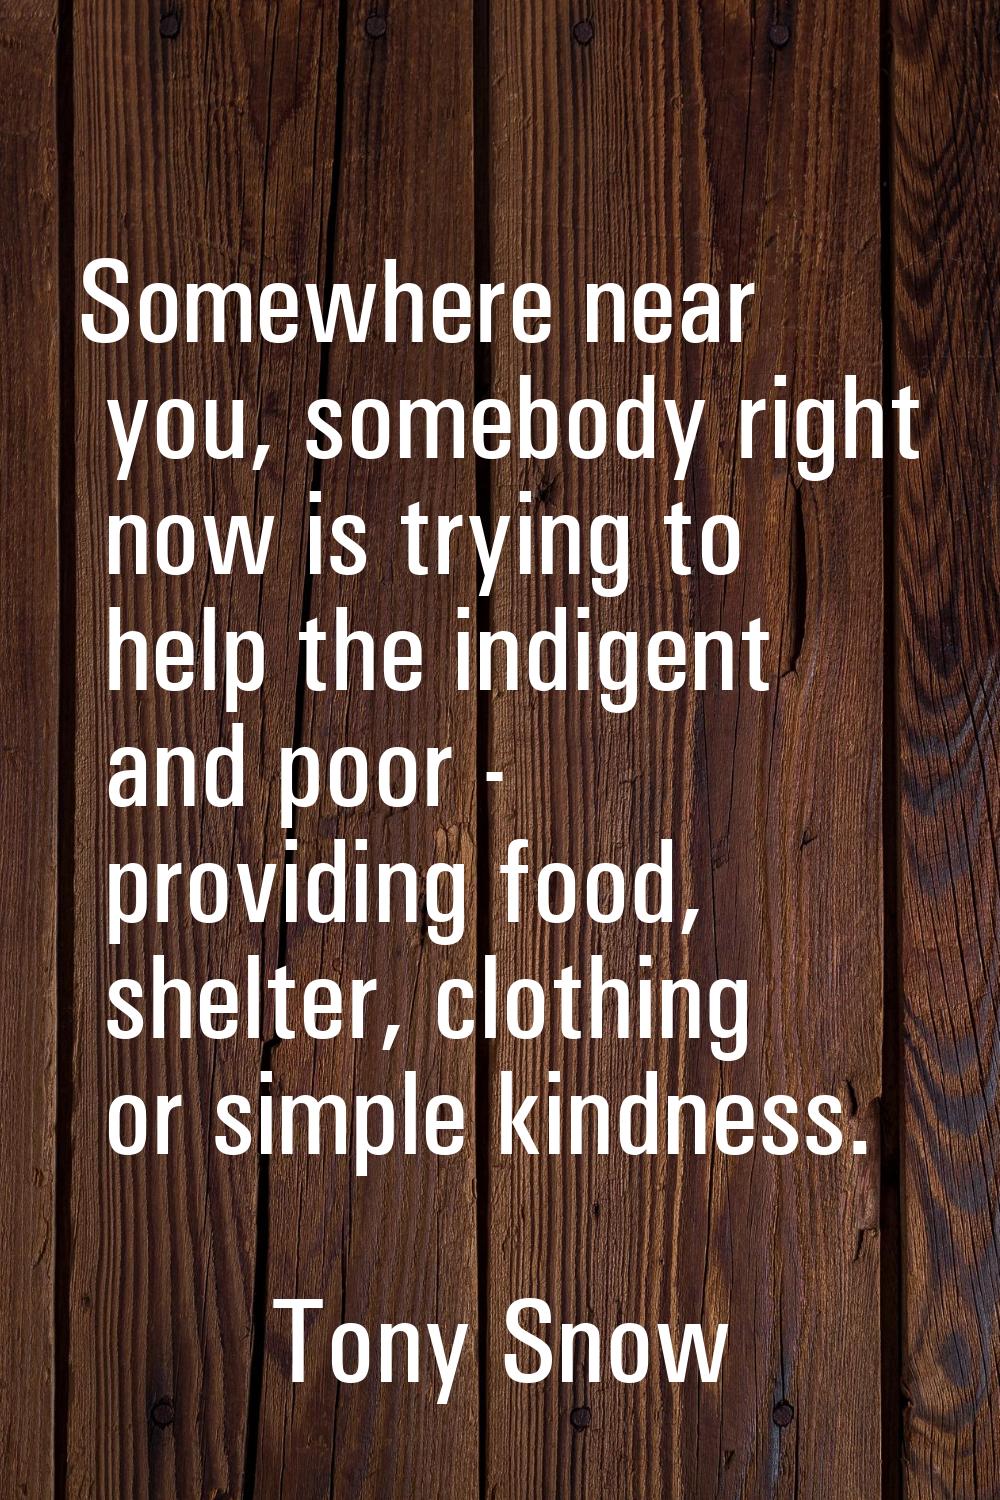 Somewhere near you, somebody right now is trying to help the indigent and poor - providing food, sh